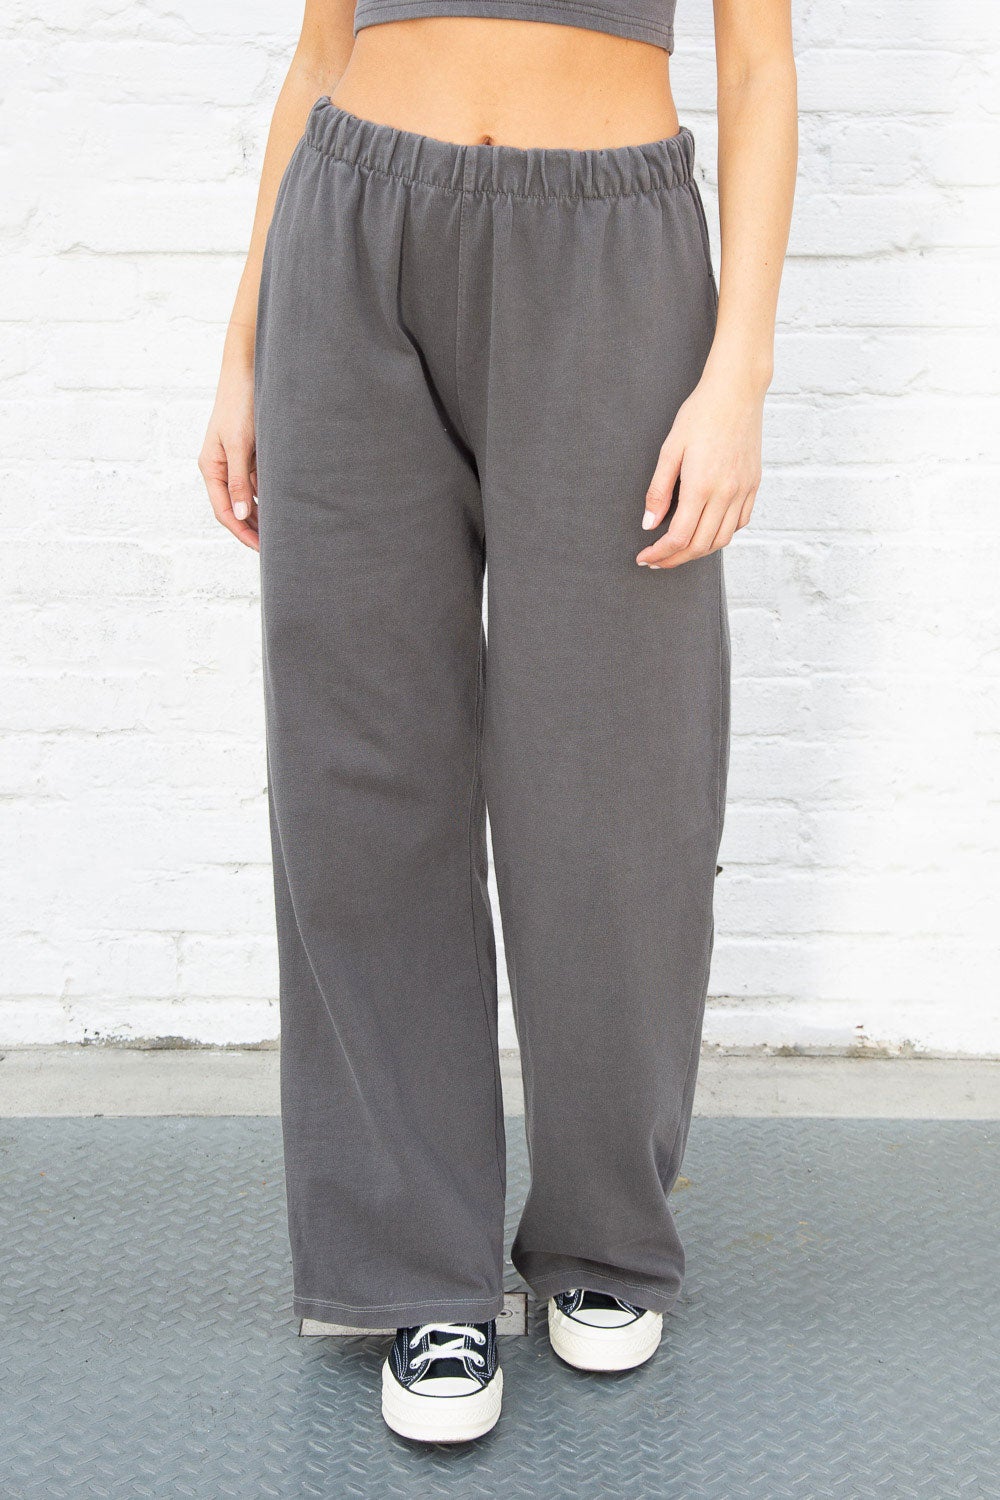 Brandy Melville Sweatpants Gray - $22 (37% Off Retail) - From Anna